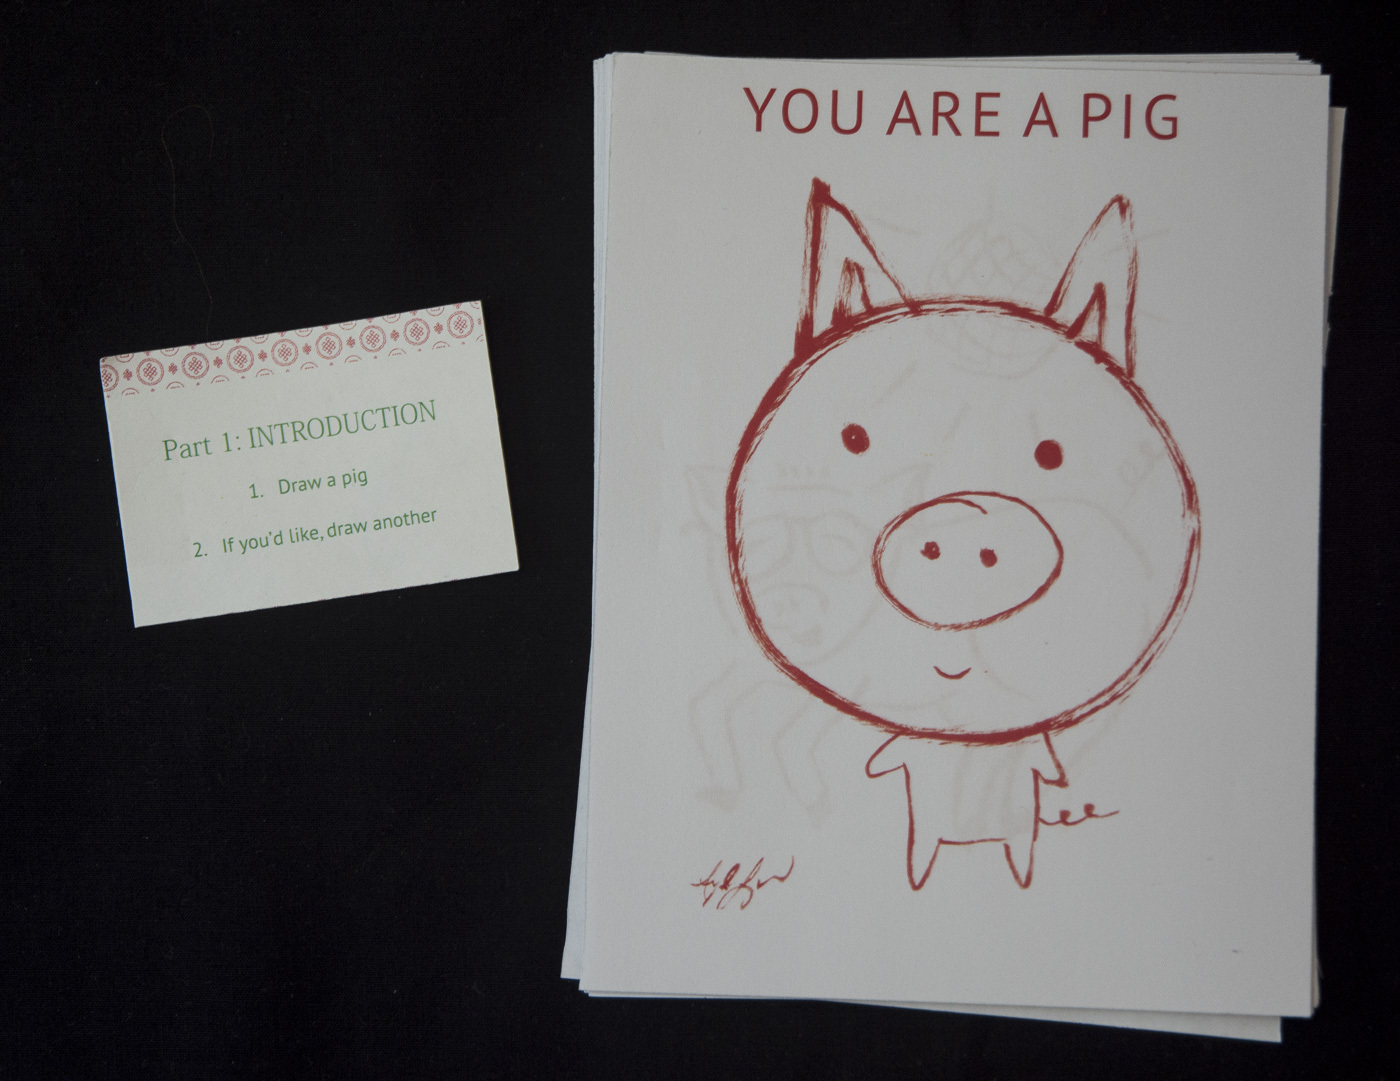 a drawing of a pig and a piece of paper that states "1. draw a pig 2 if you'd like, draw another"